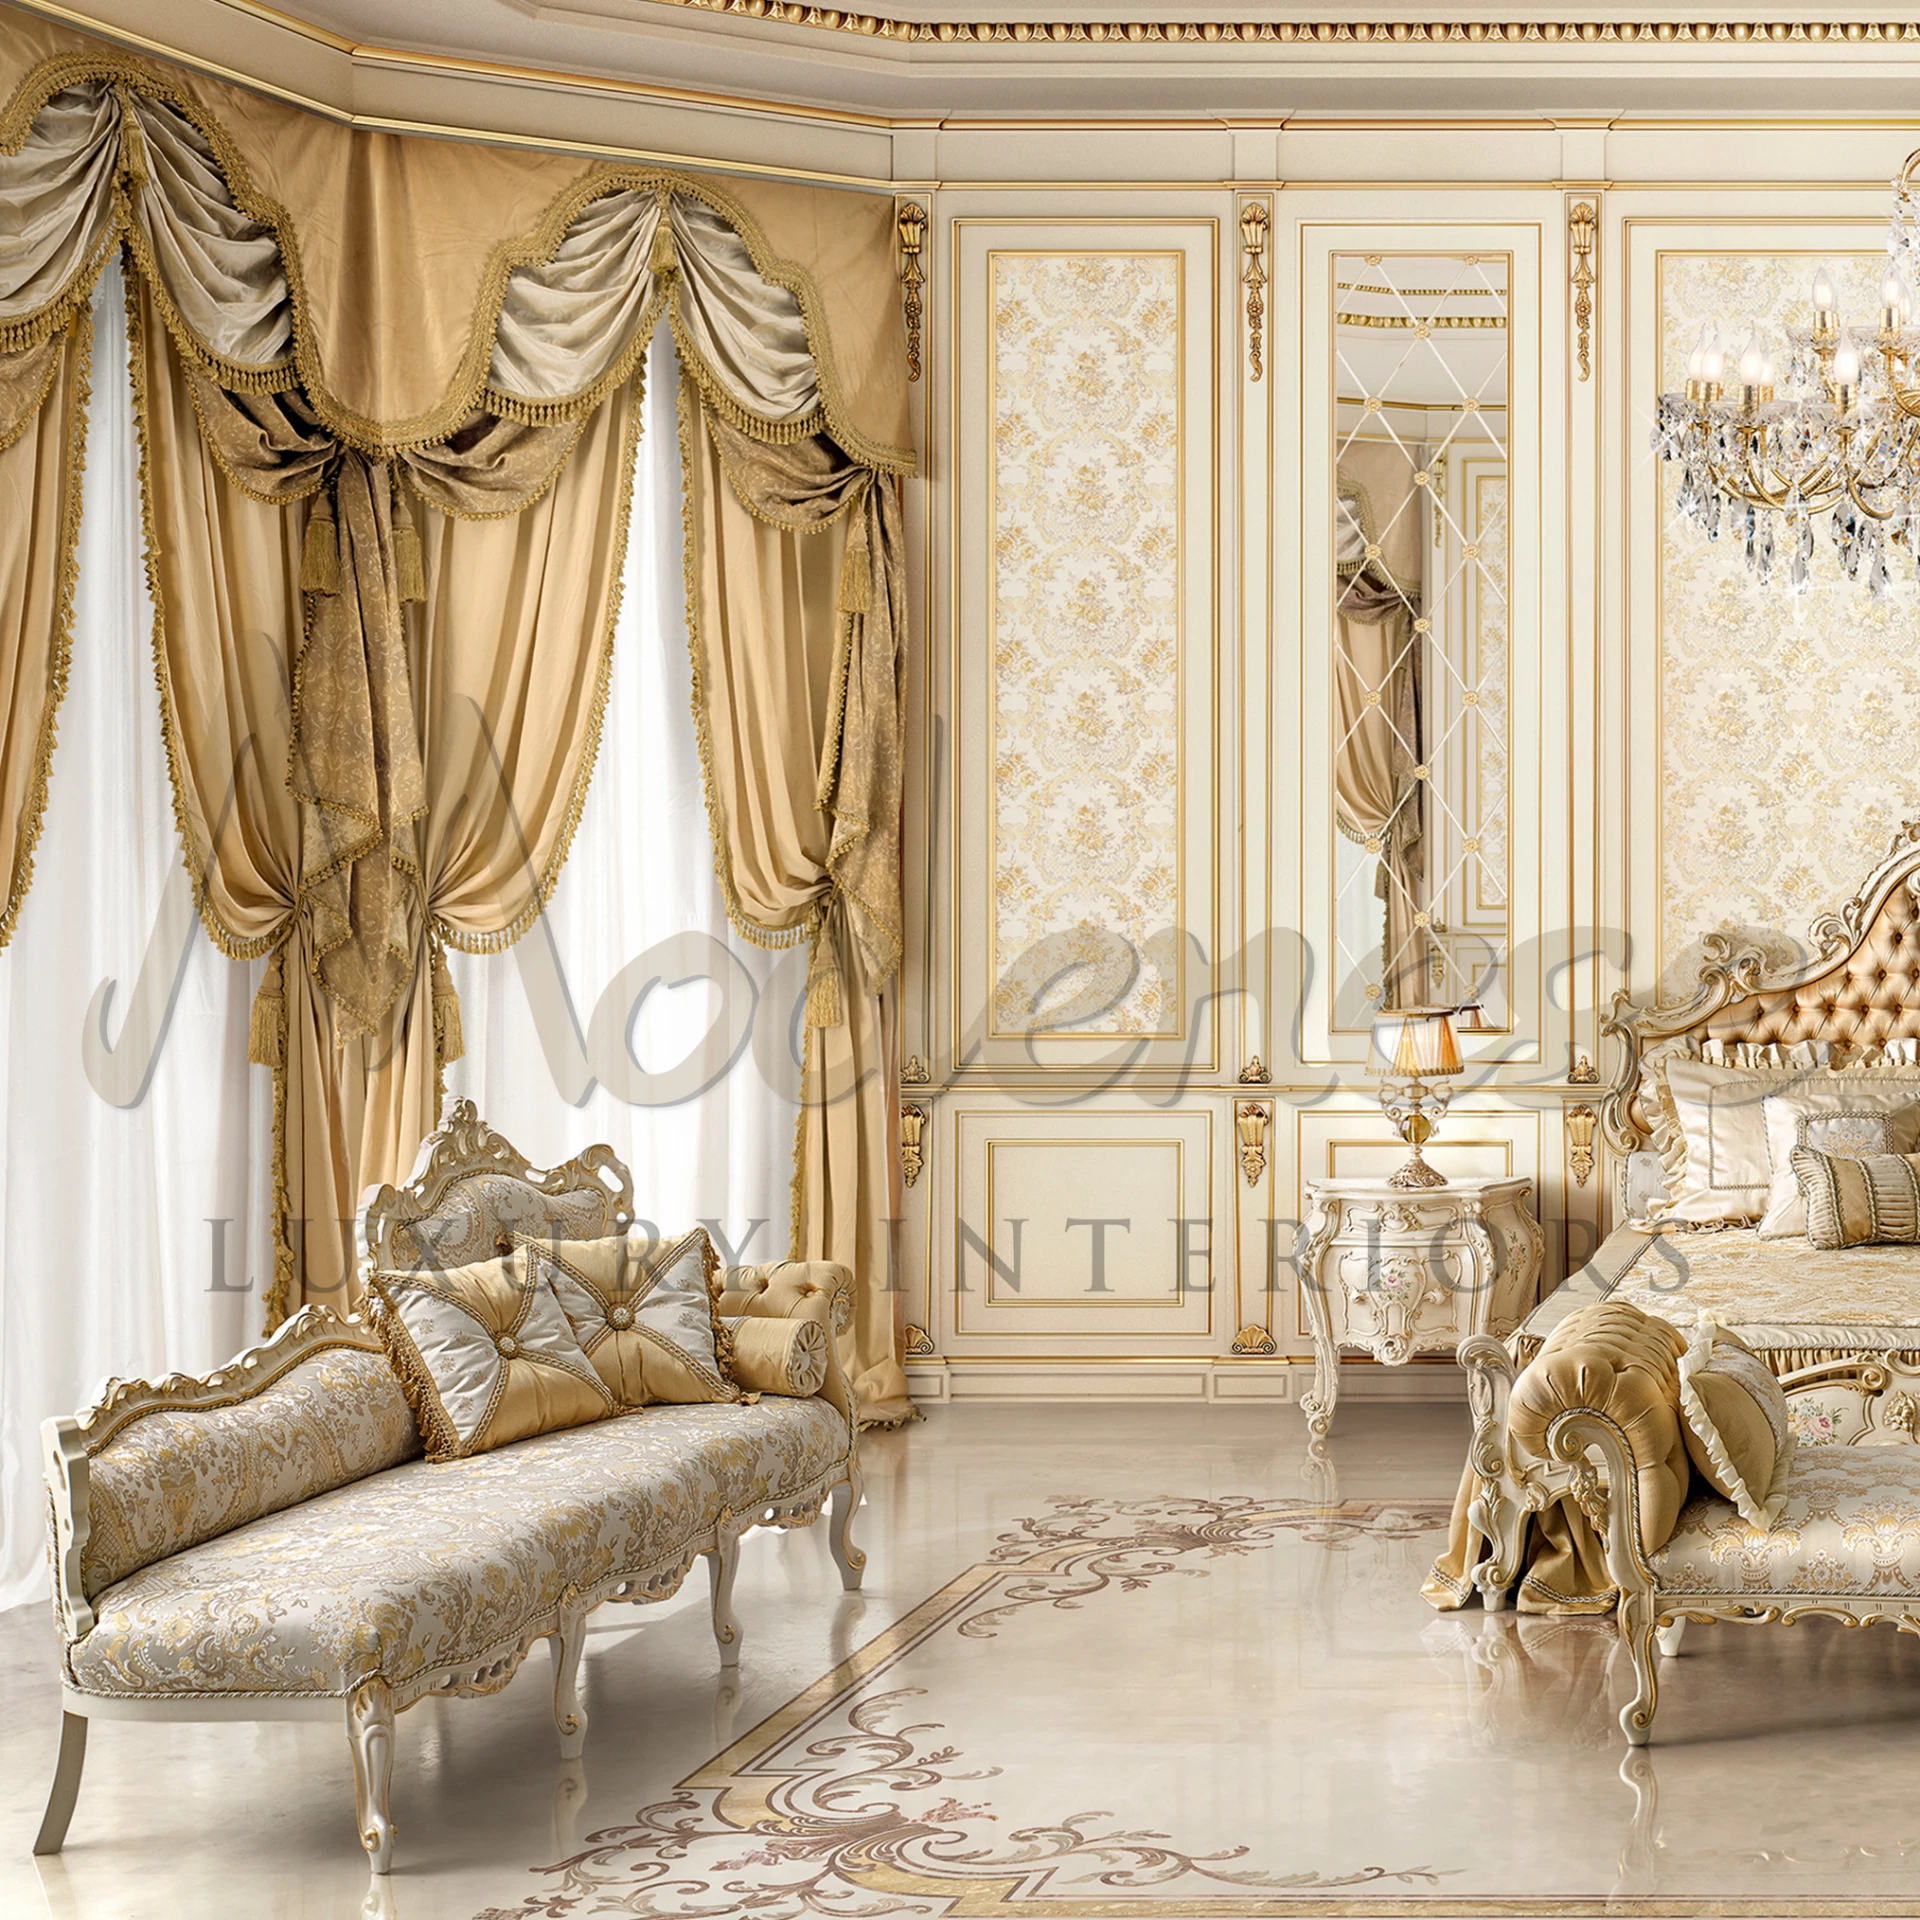 Ornamental gold bench with floral damask seating and lavish pillow arrangement                                                                                     